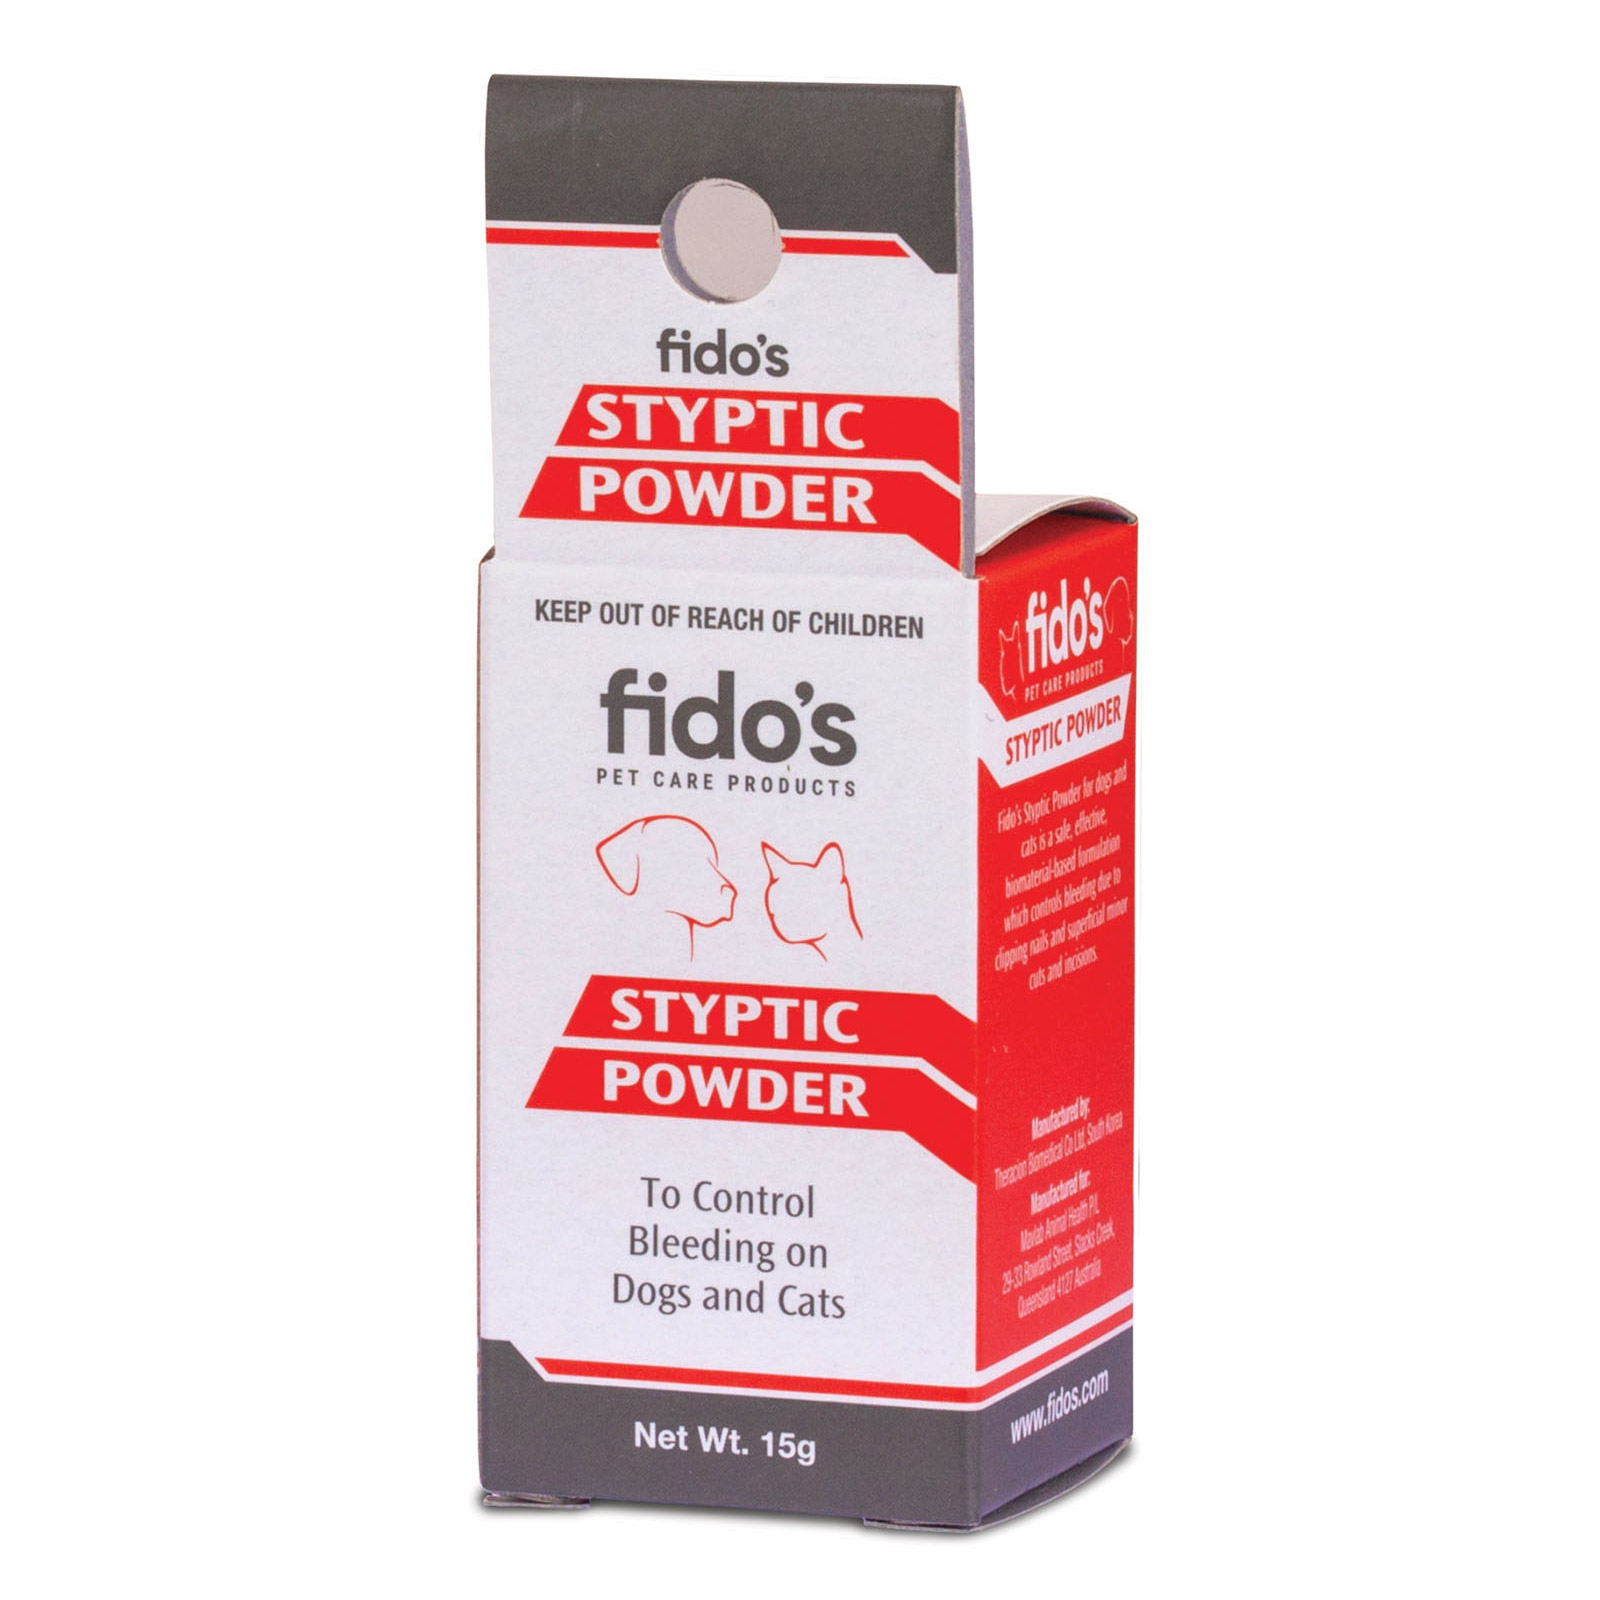 Fido's Styptic Powder for Dogs